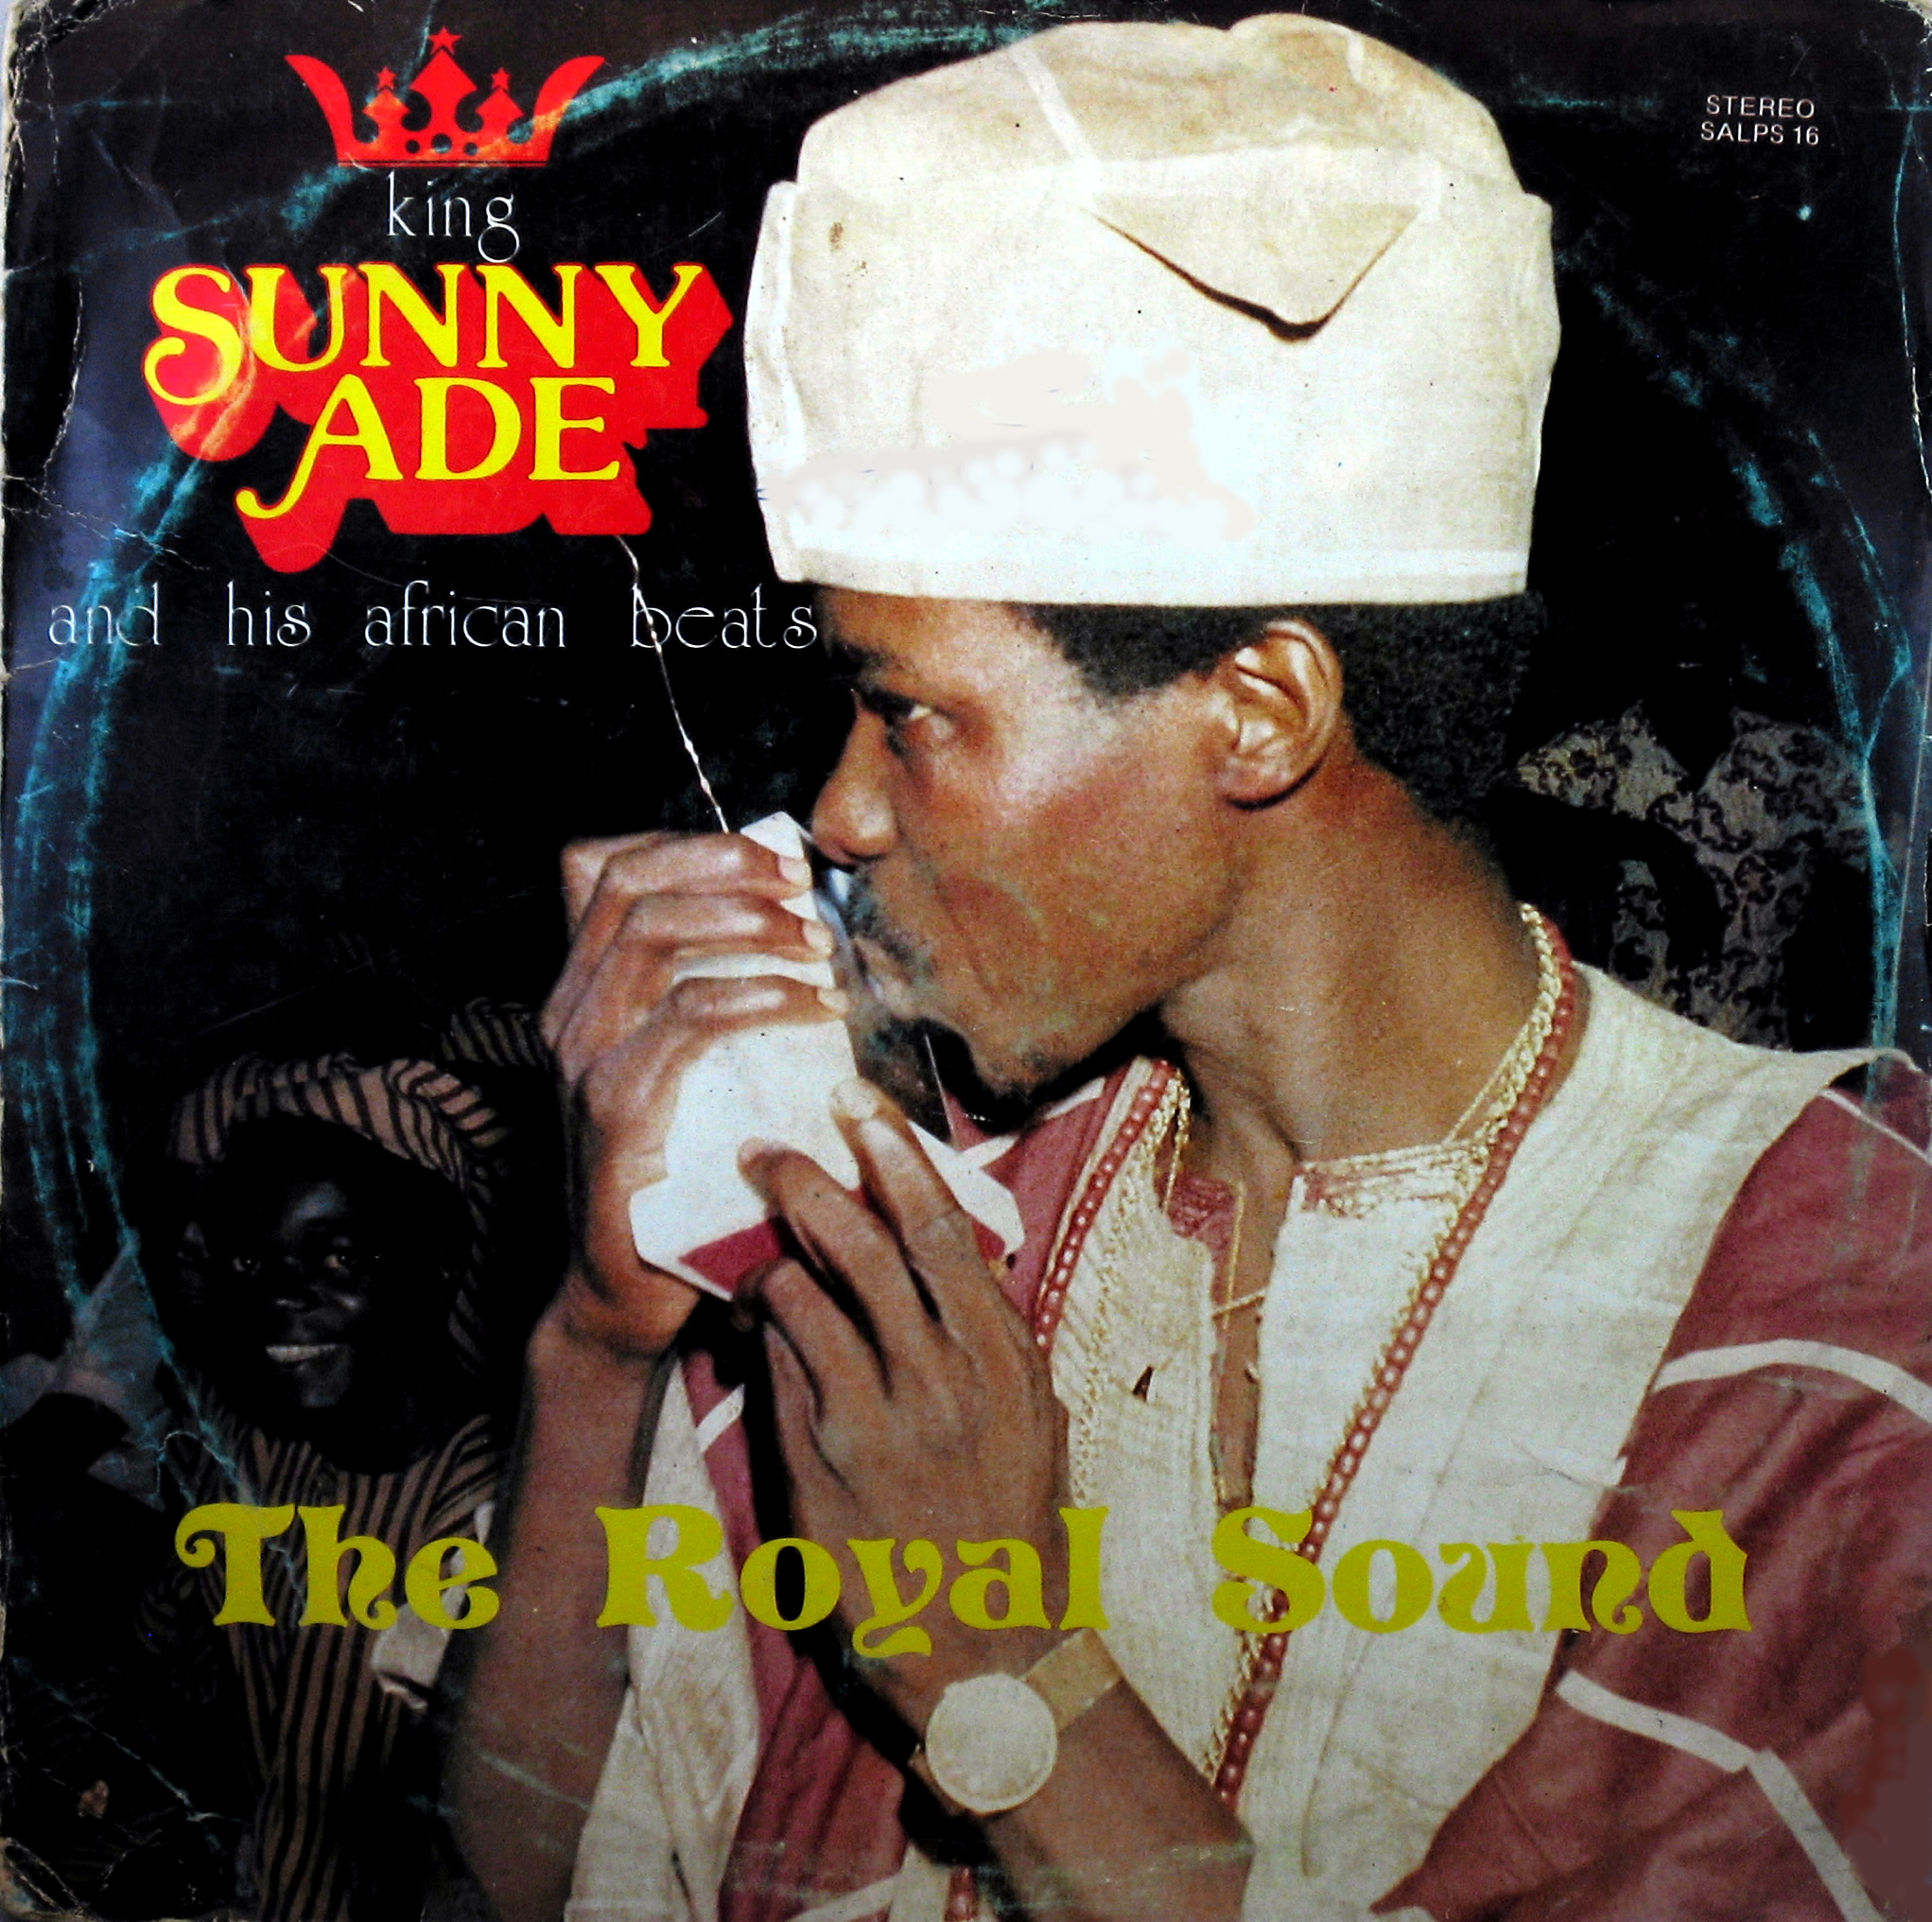 King Sunny Adé and his African Beats – the Royal Sound, Sunny Alade Records 1979 King-Sunny-Ad%C3%A9-front